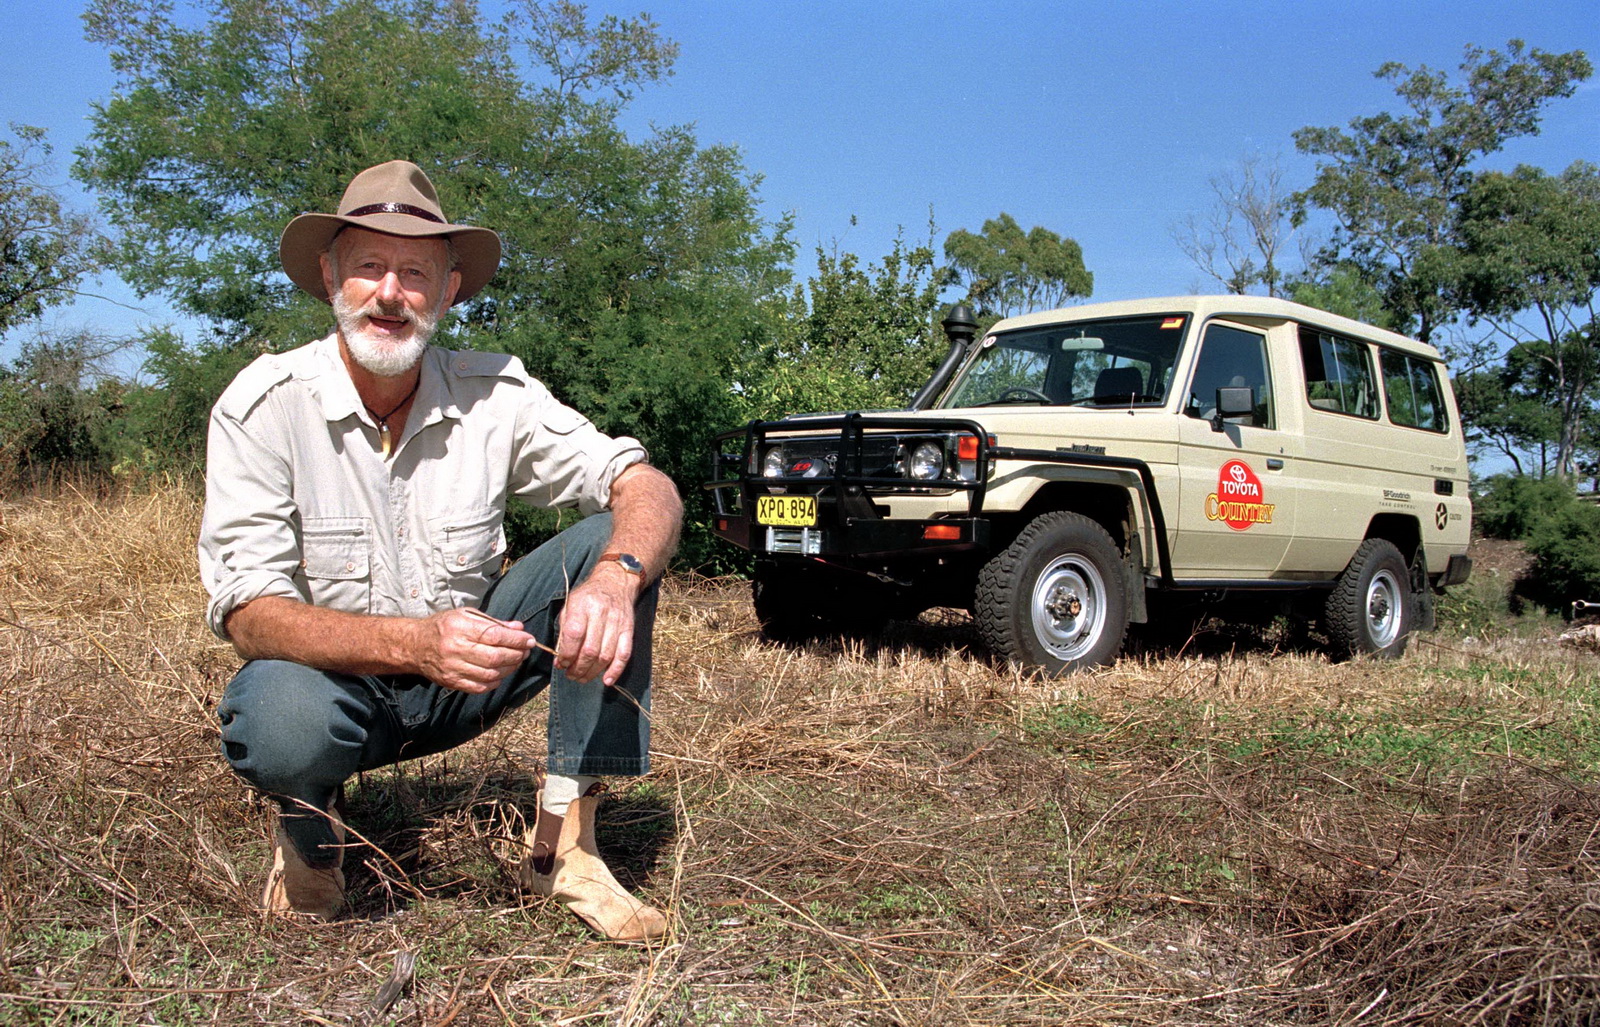 Malcolm Douglas and his 2002 Toyota LandCruiser 78 Series Troop Carrier. 020412-106-15A